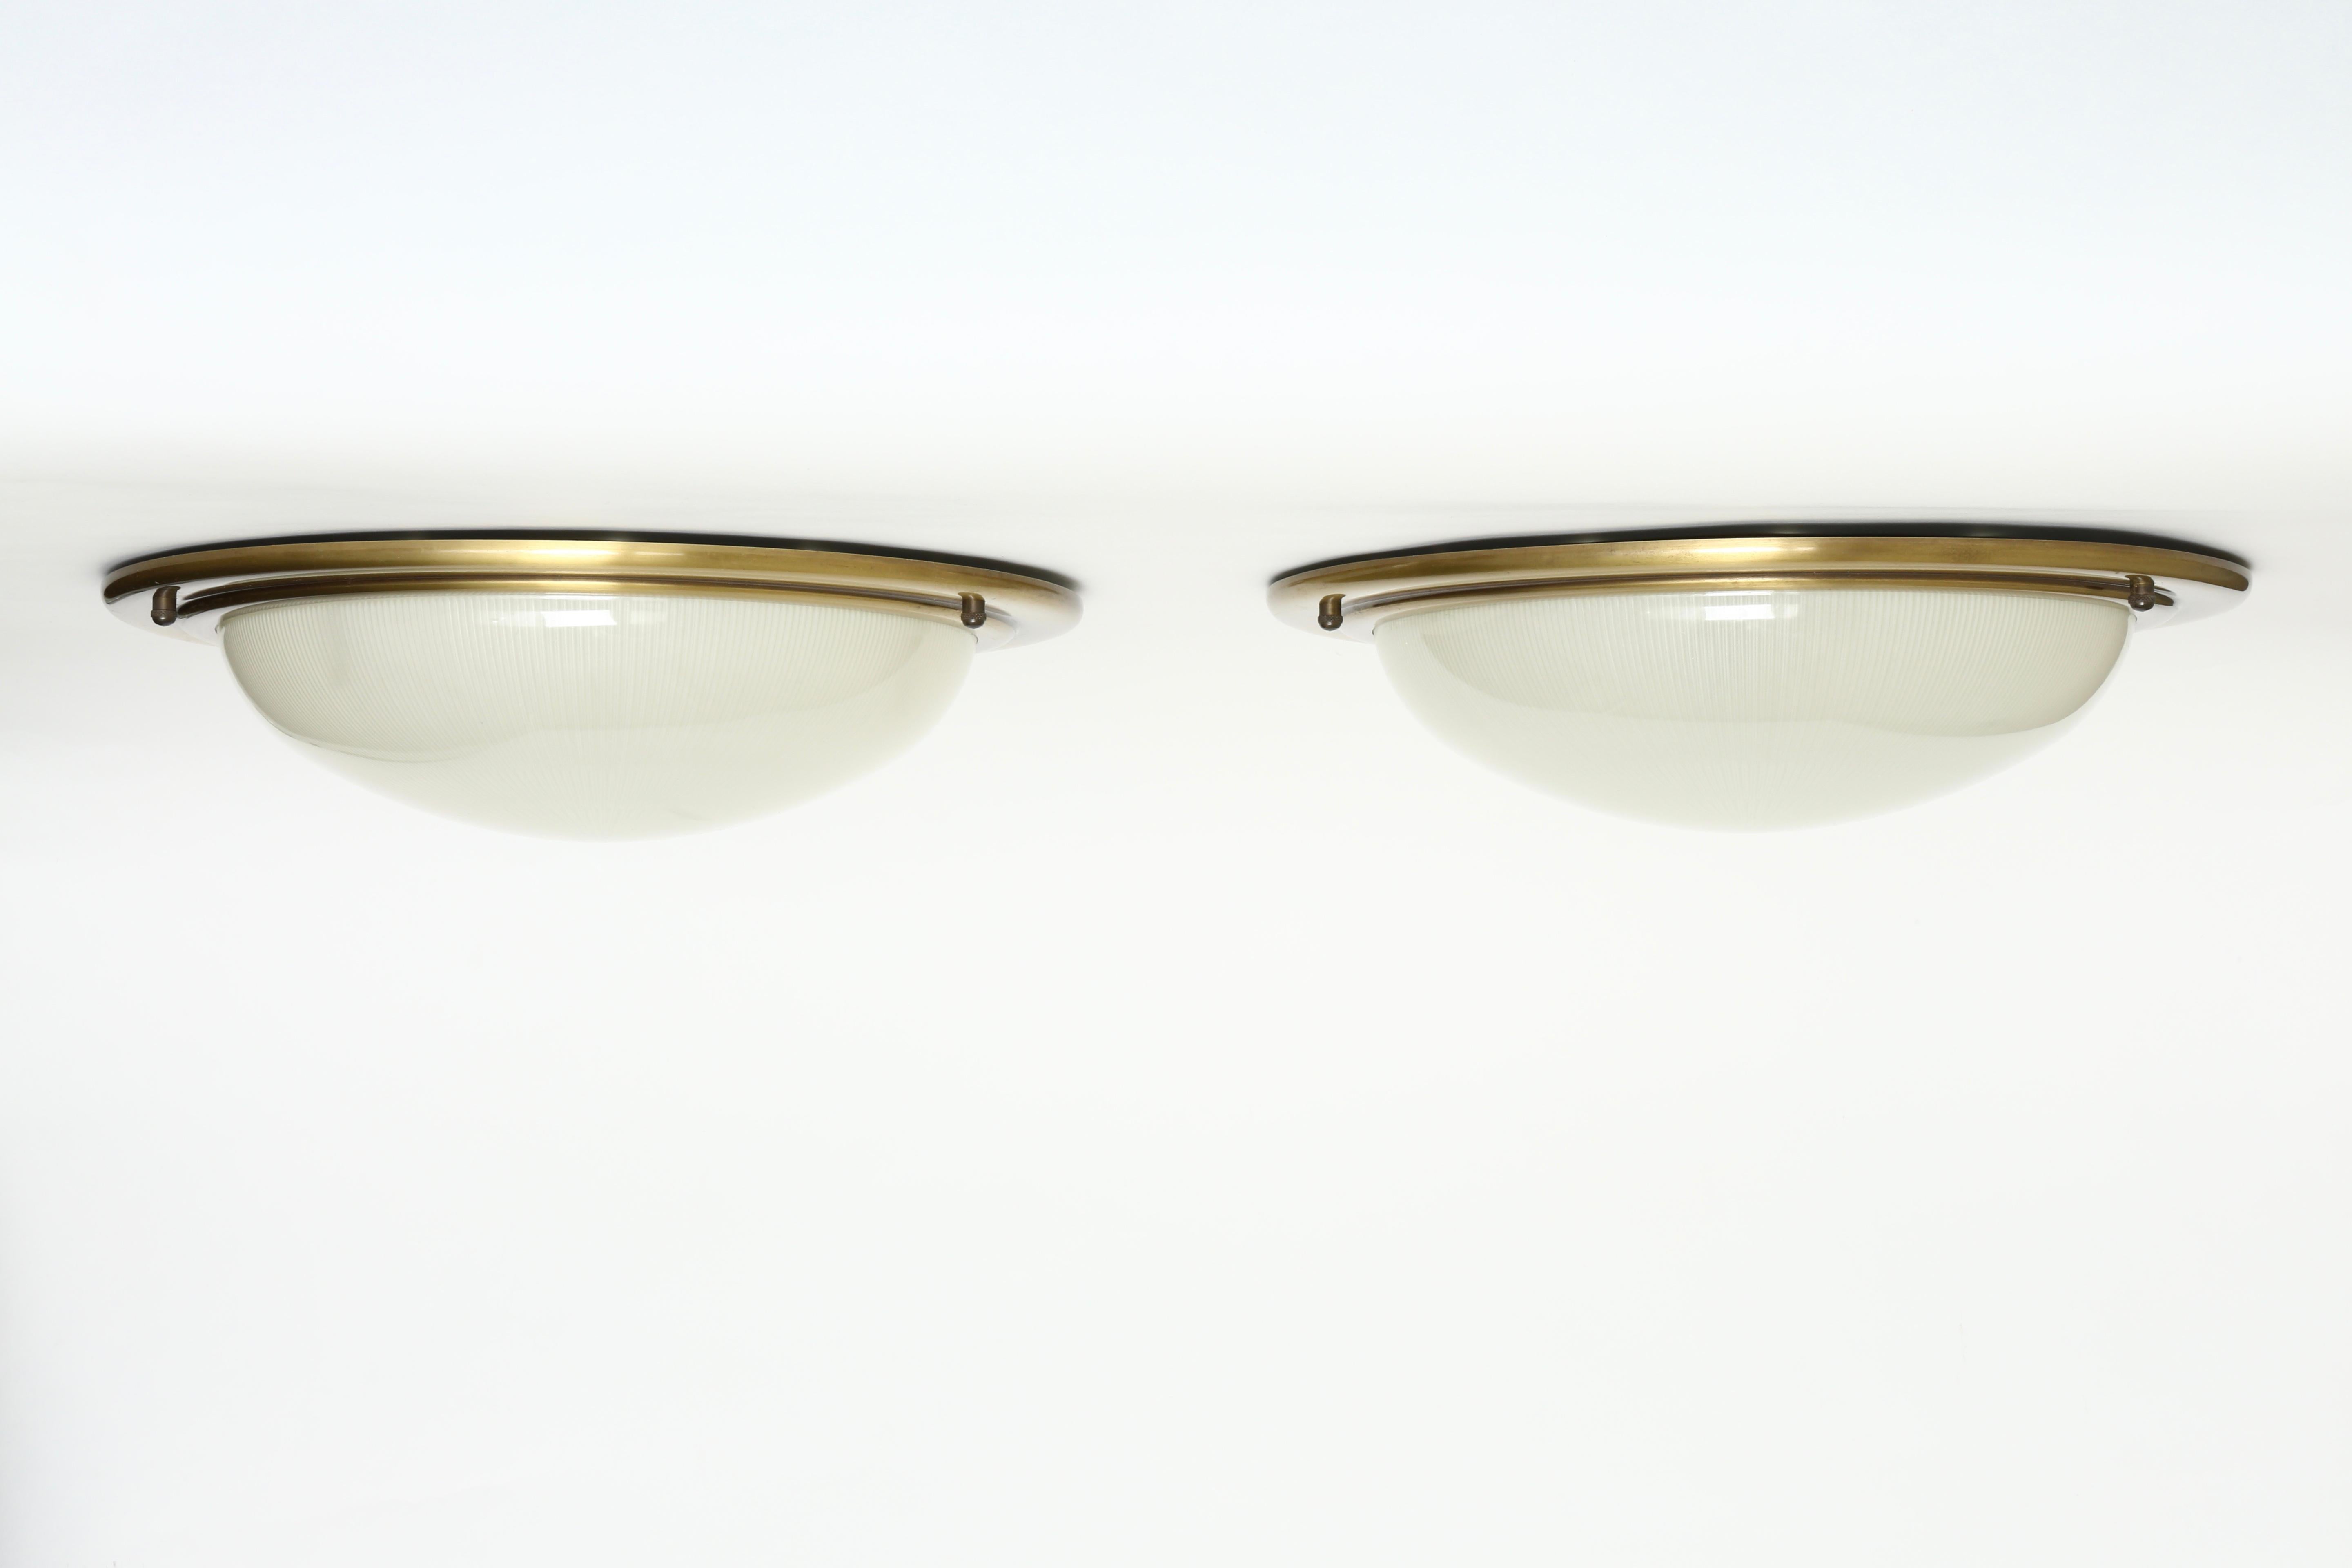 Sergio Mazza style flush mount
Brass, ribbed glass.
Italy, 1960s.
Available as a single or a pair.
Price for one item.
Three flush mounts available.
      